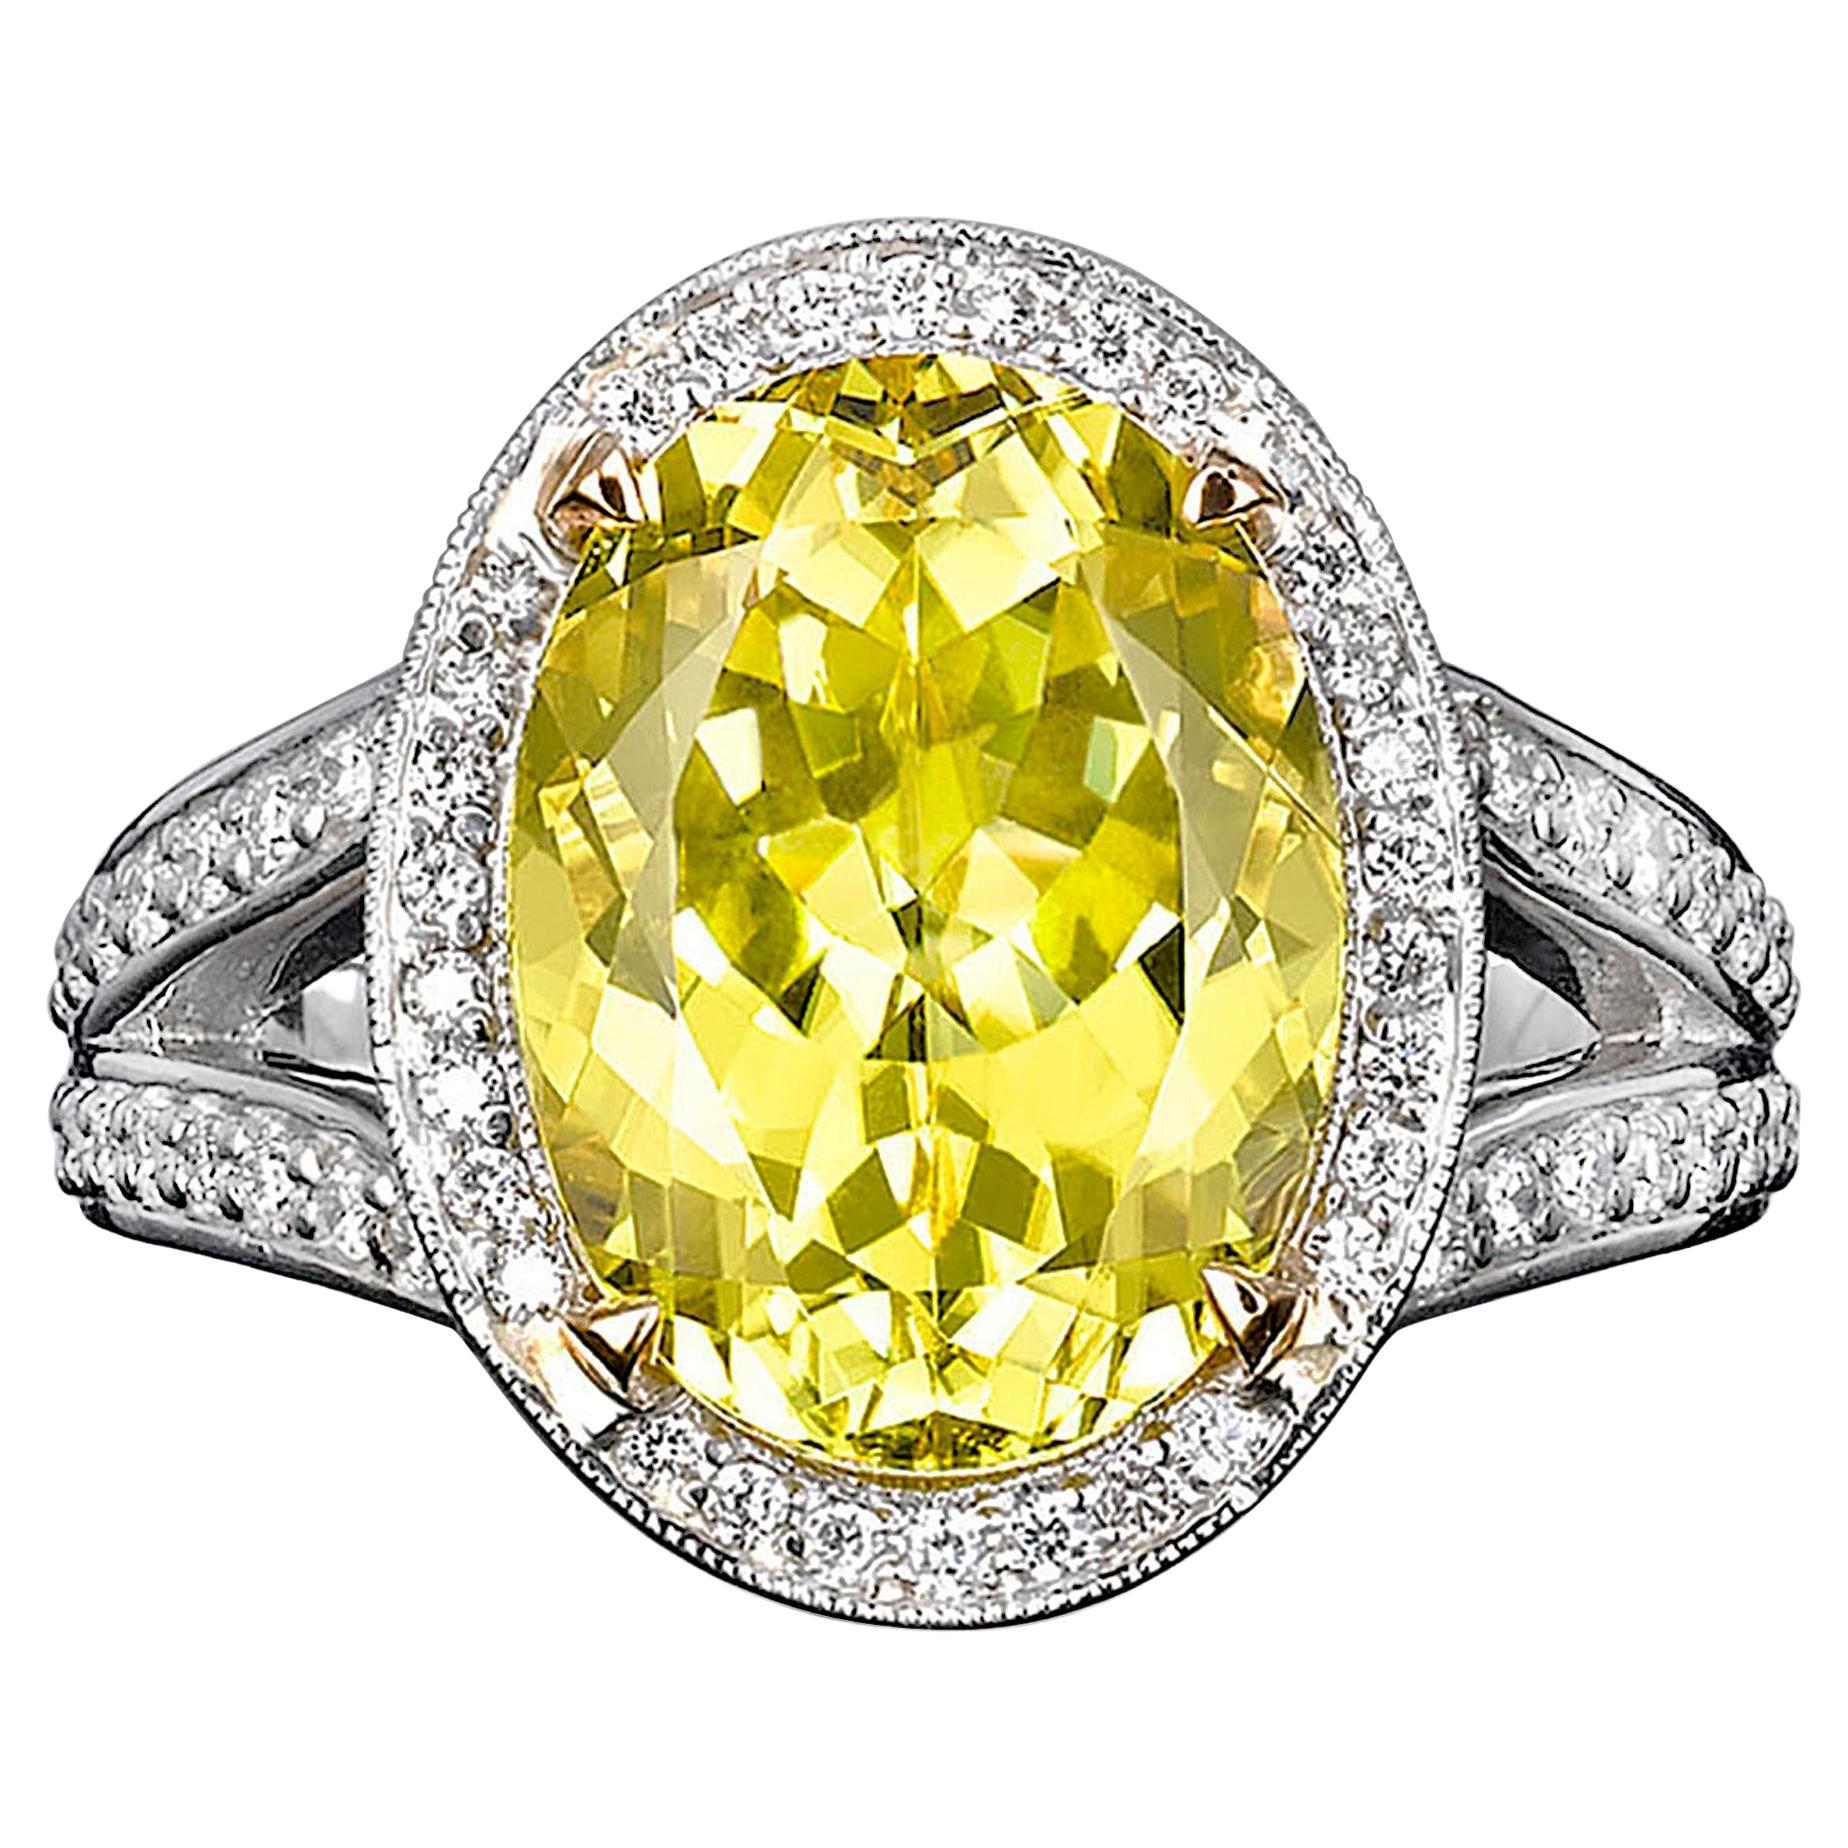 Canary Yellow Tourmaline Ring 7.11 Carat For Sale